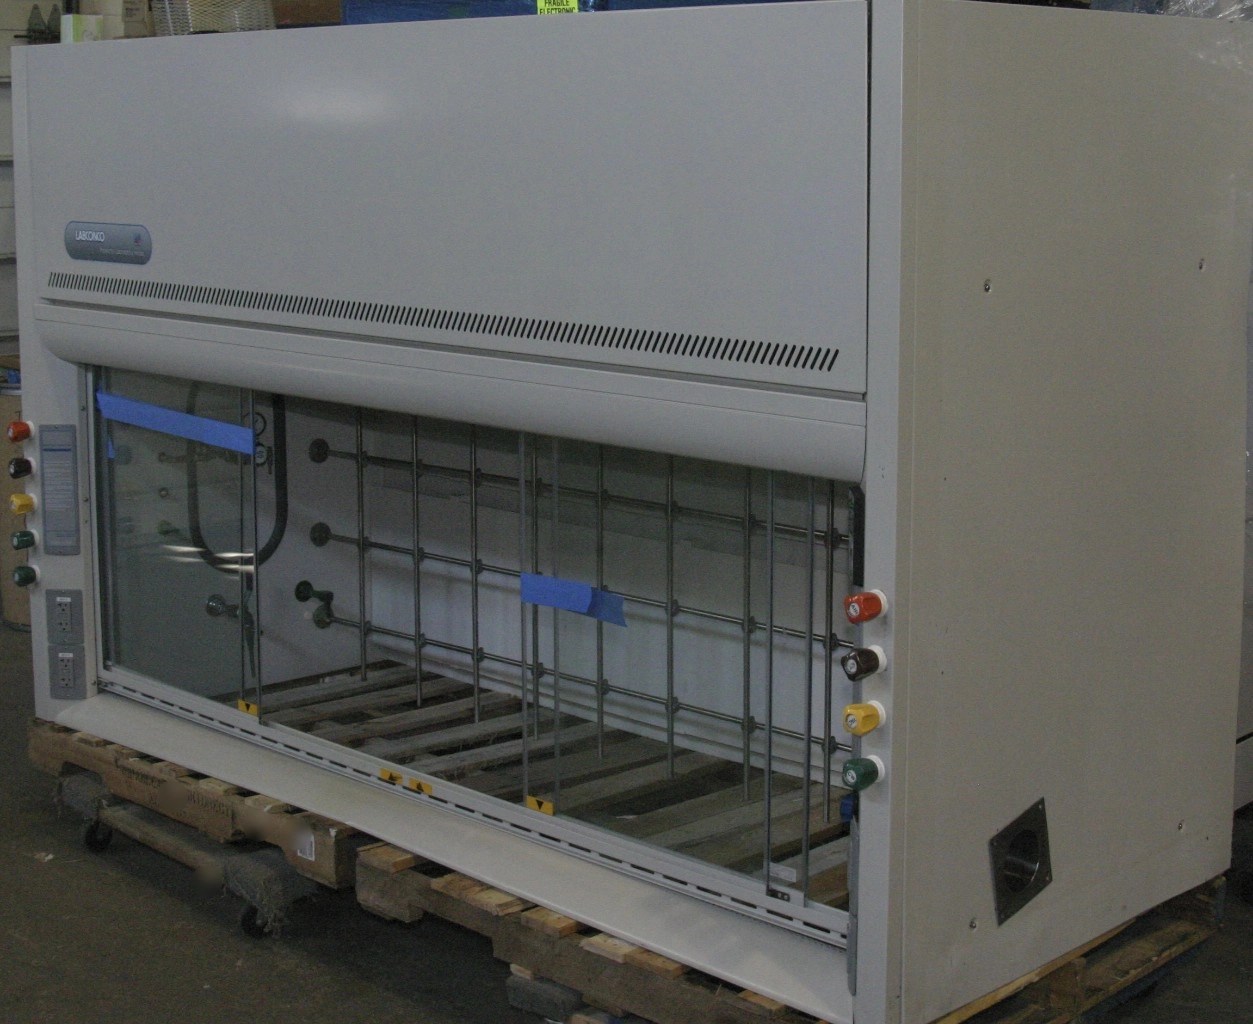 Labconco Protector Chemical Fume Hood with Monkey Bar